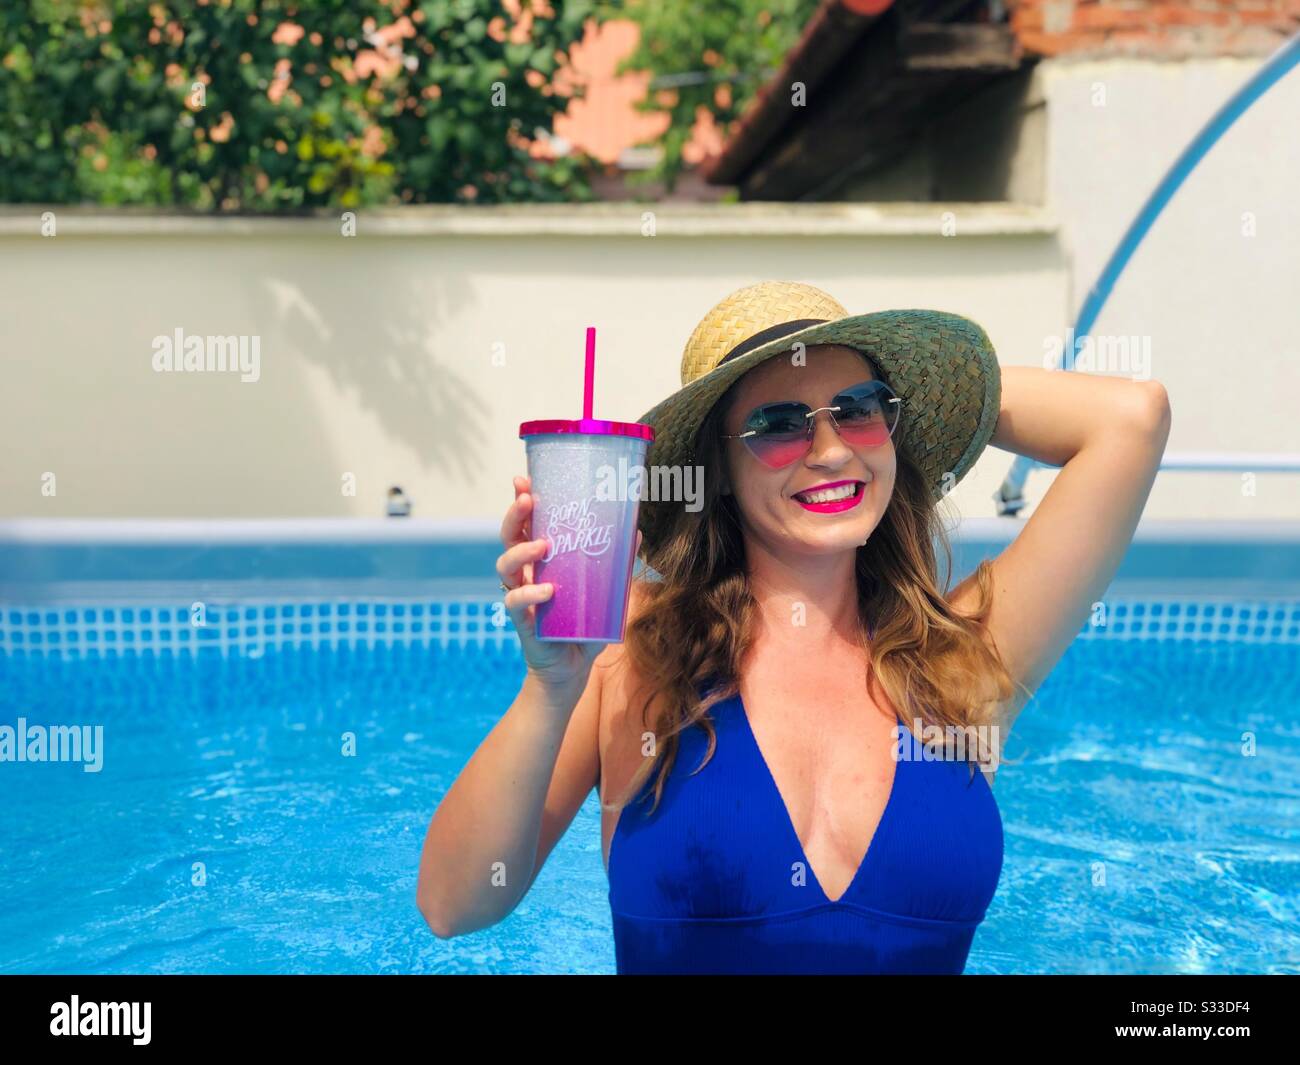 Woman wearing blue bikini, sunglasses and straw hat, holding a drink in the pool Stock Photo